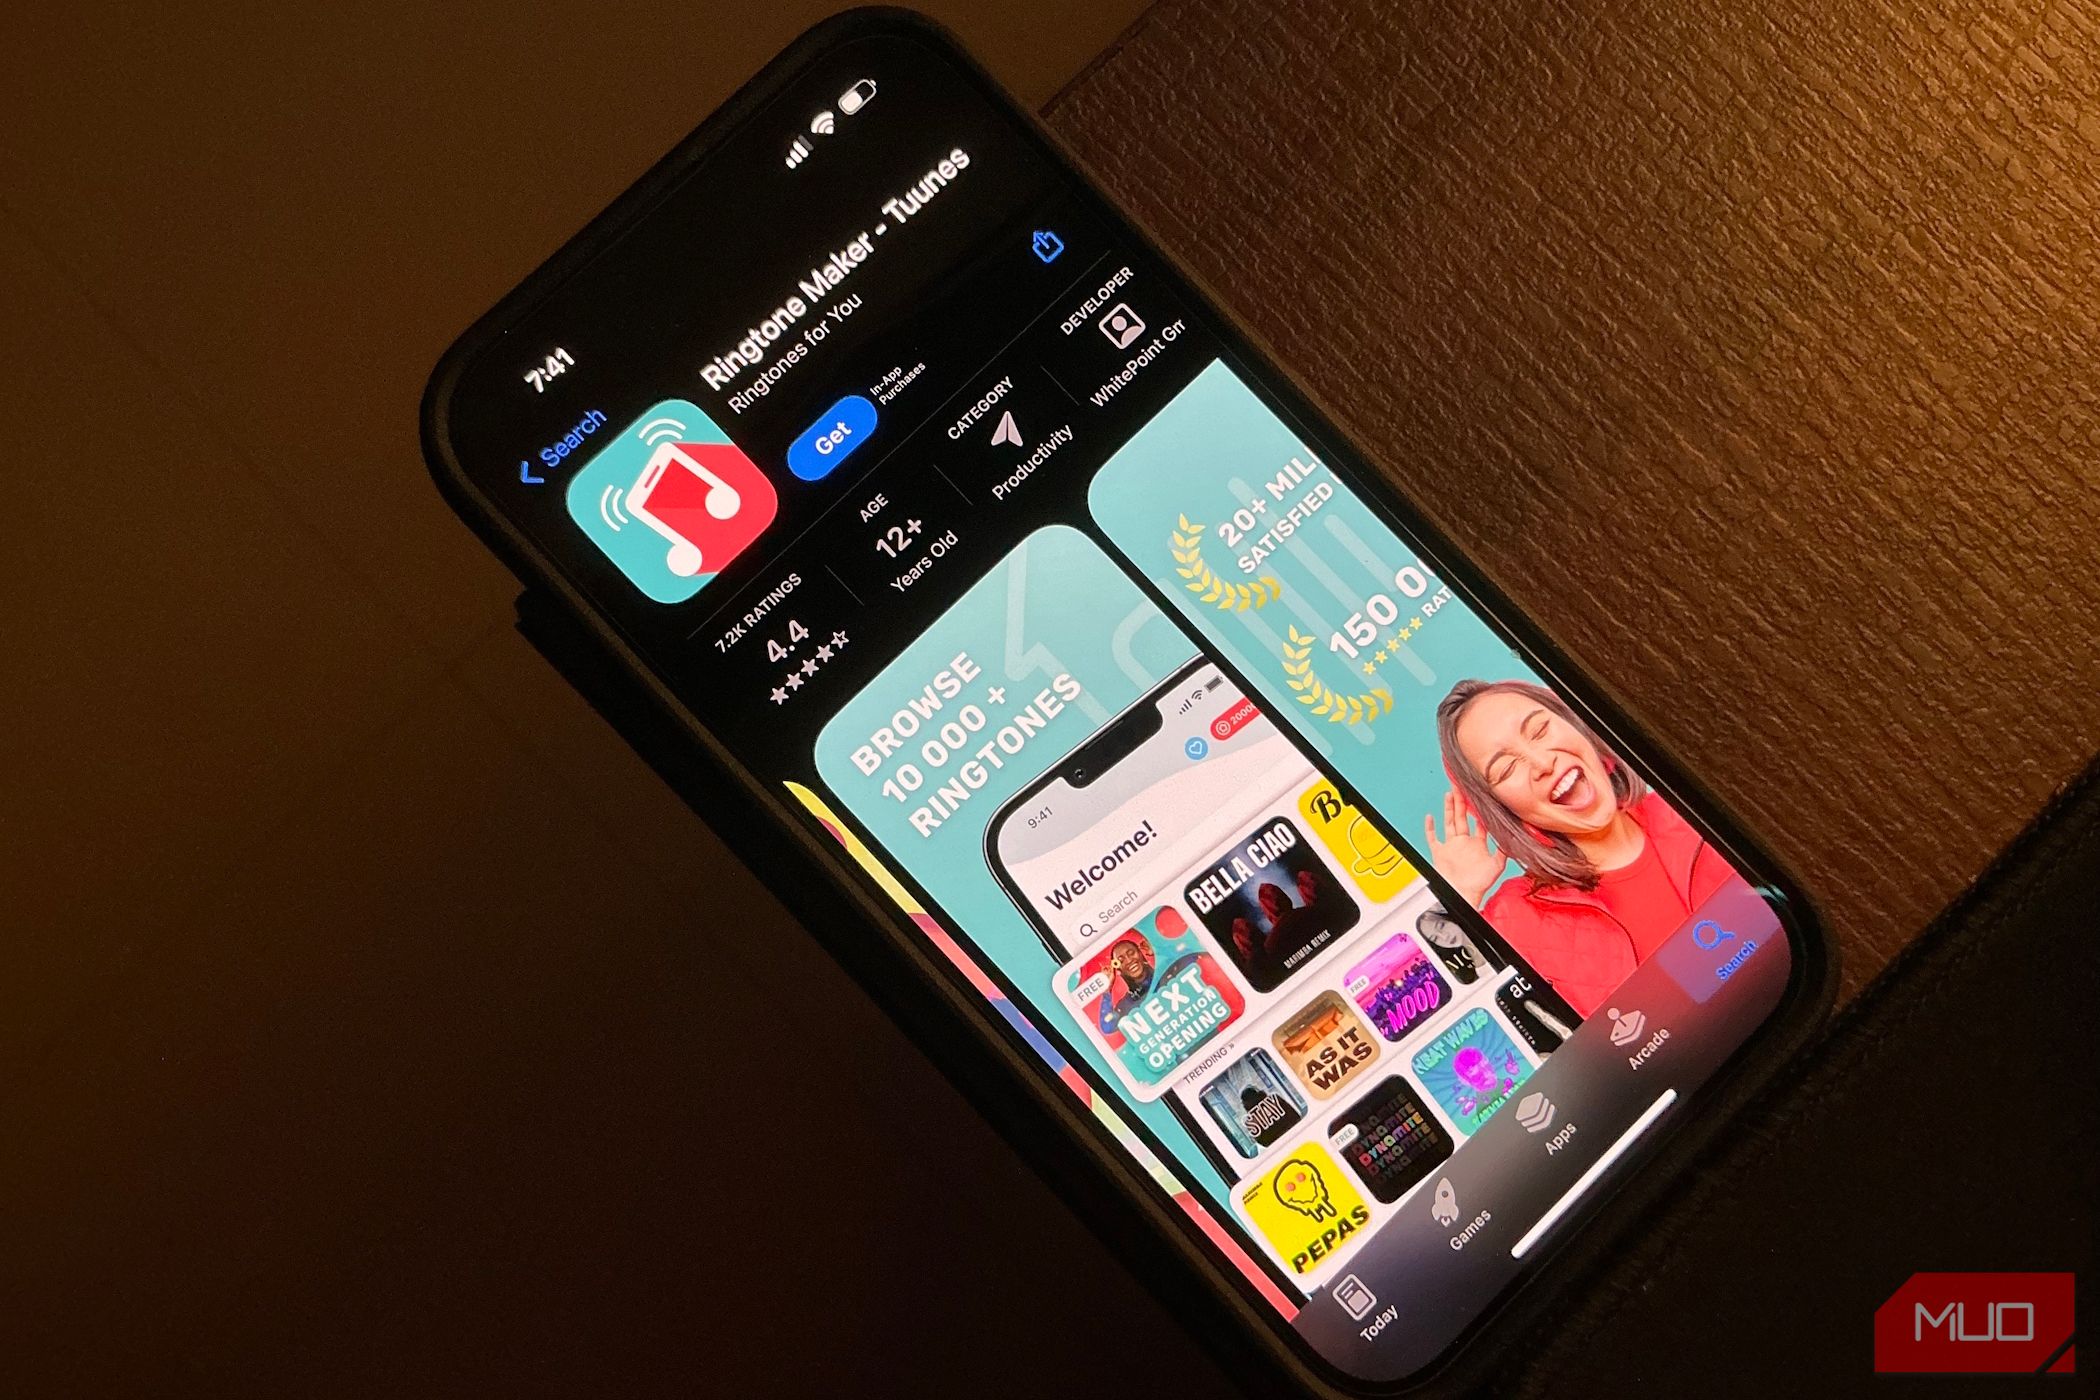 Ringtone app on an App Store shown on an iPhone laying on a desk